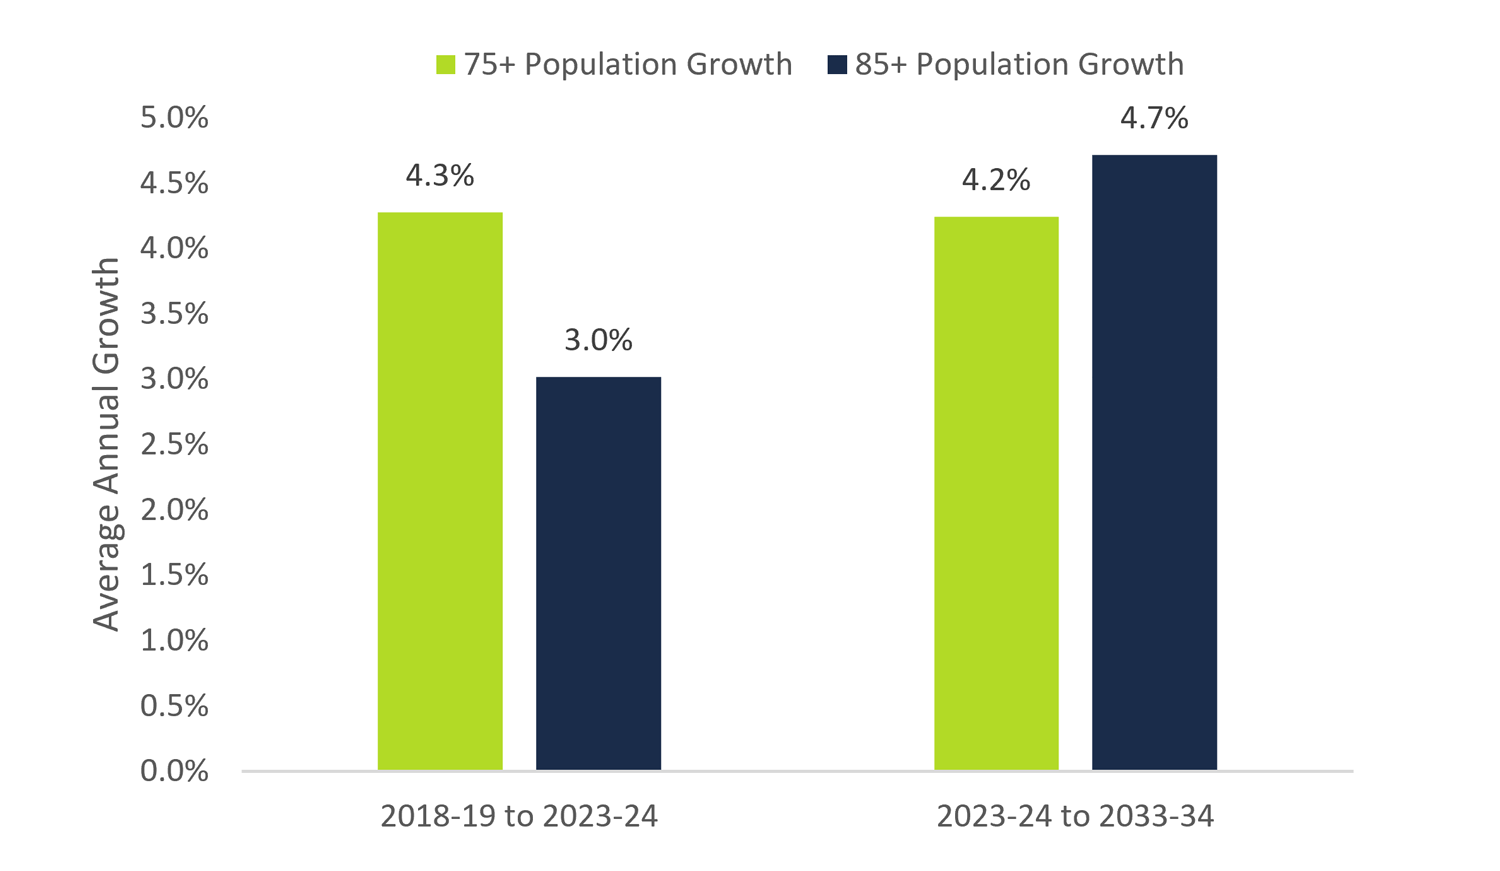 Growth in Ontarians aged 85 and over will accelerate over the long-term